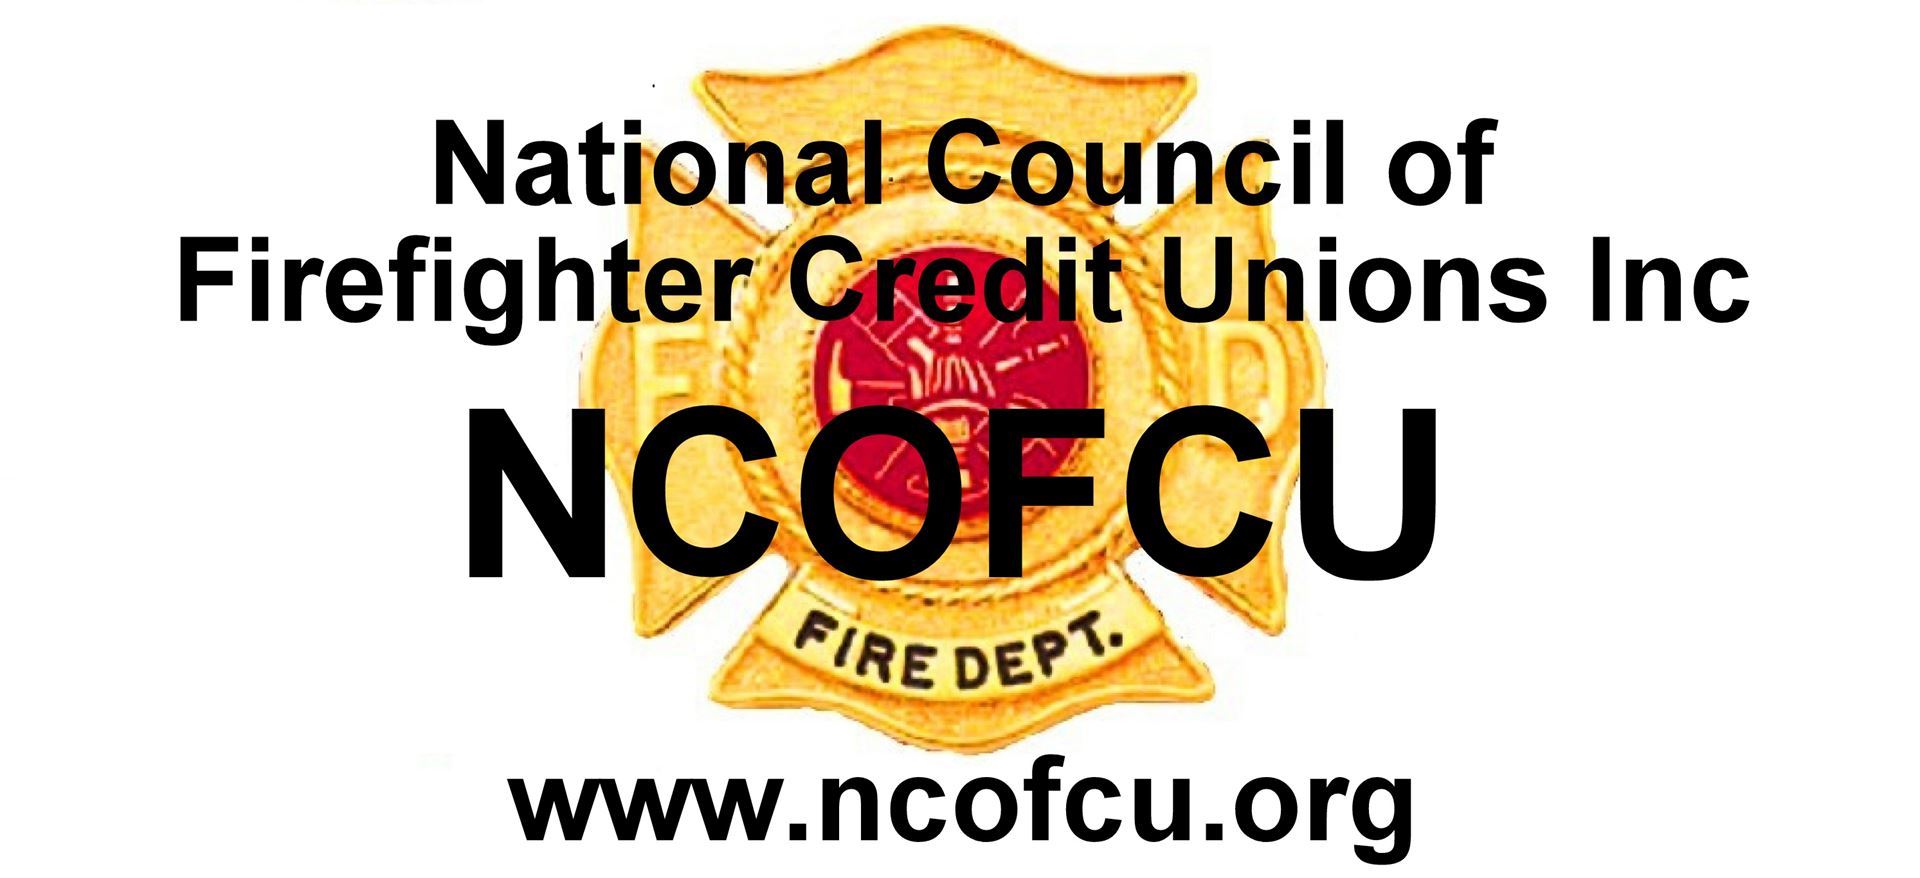 National Coalition of Firefighter Credit Unions, Inc.